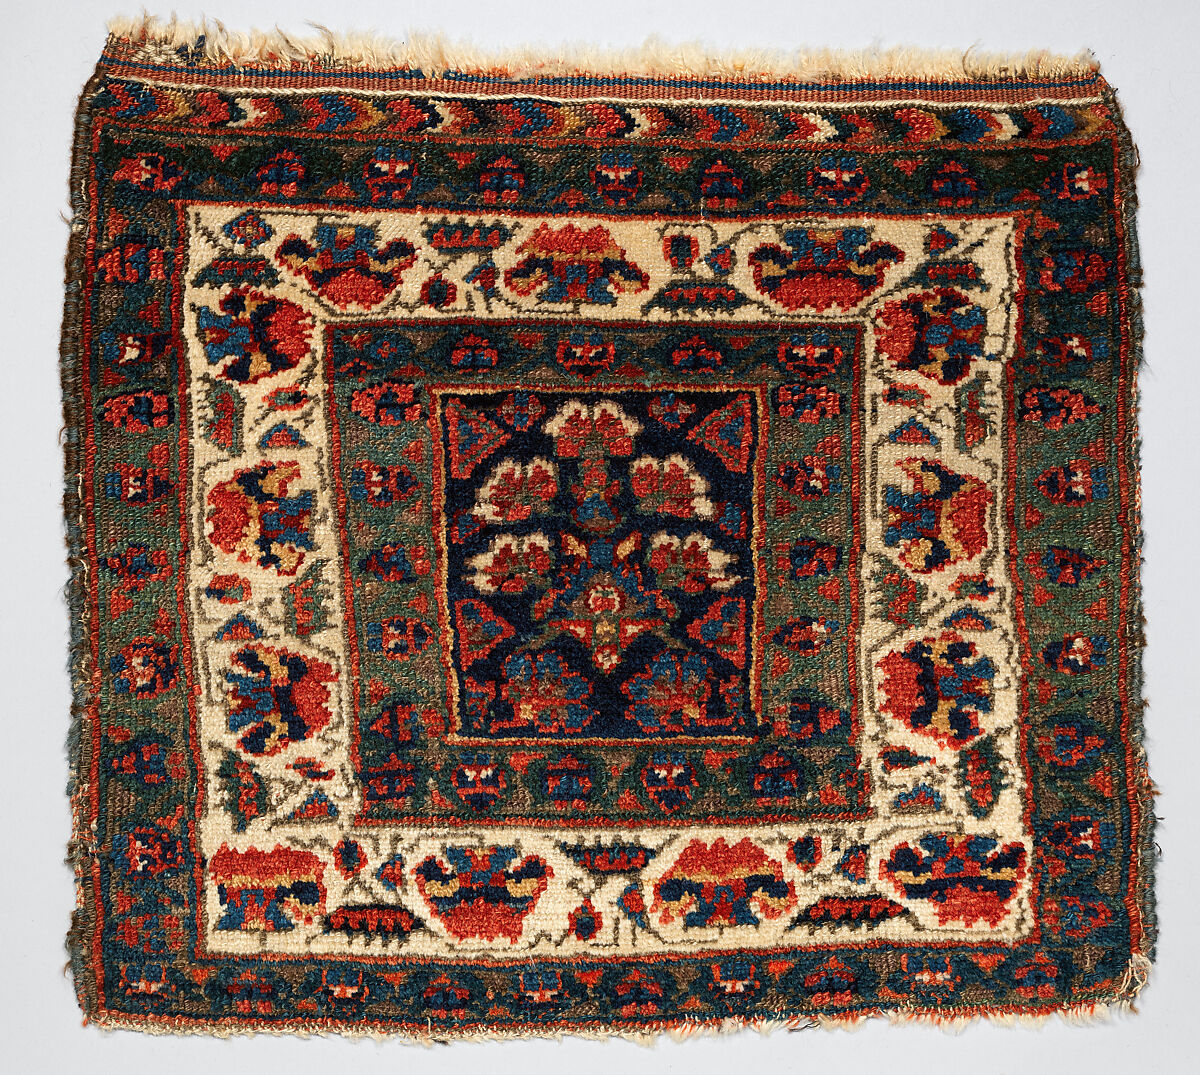 Face from Half of Double Saddle Bag (Khorjin), Wool (warp, weft, and pile); asymmetrically knotted pile, single wefted-construction, tapestry weave 